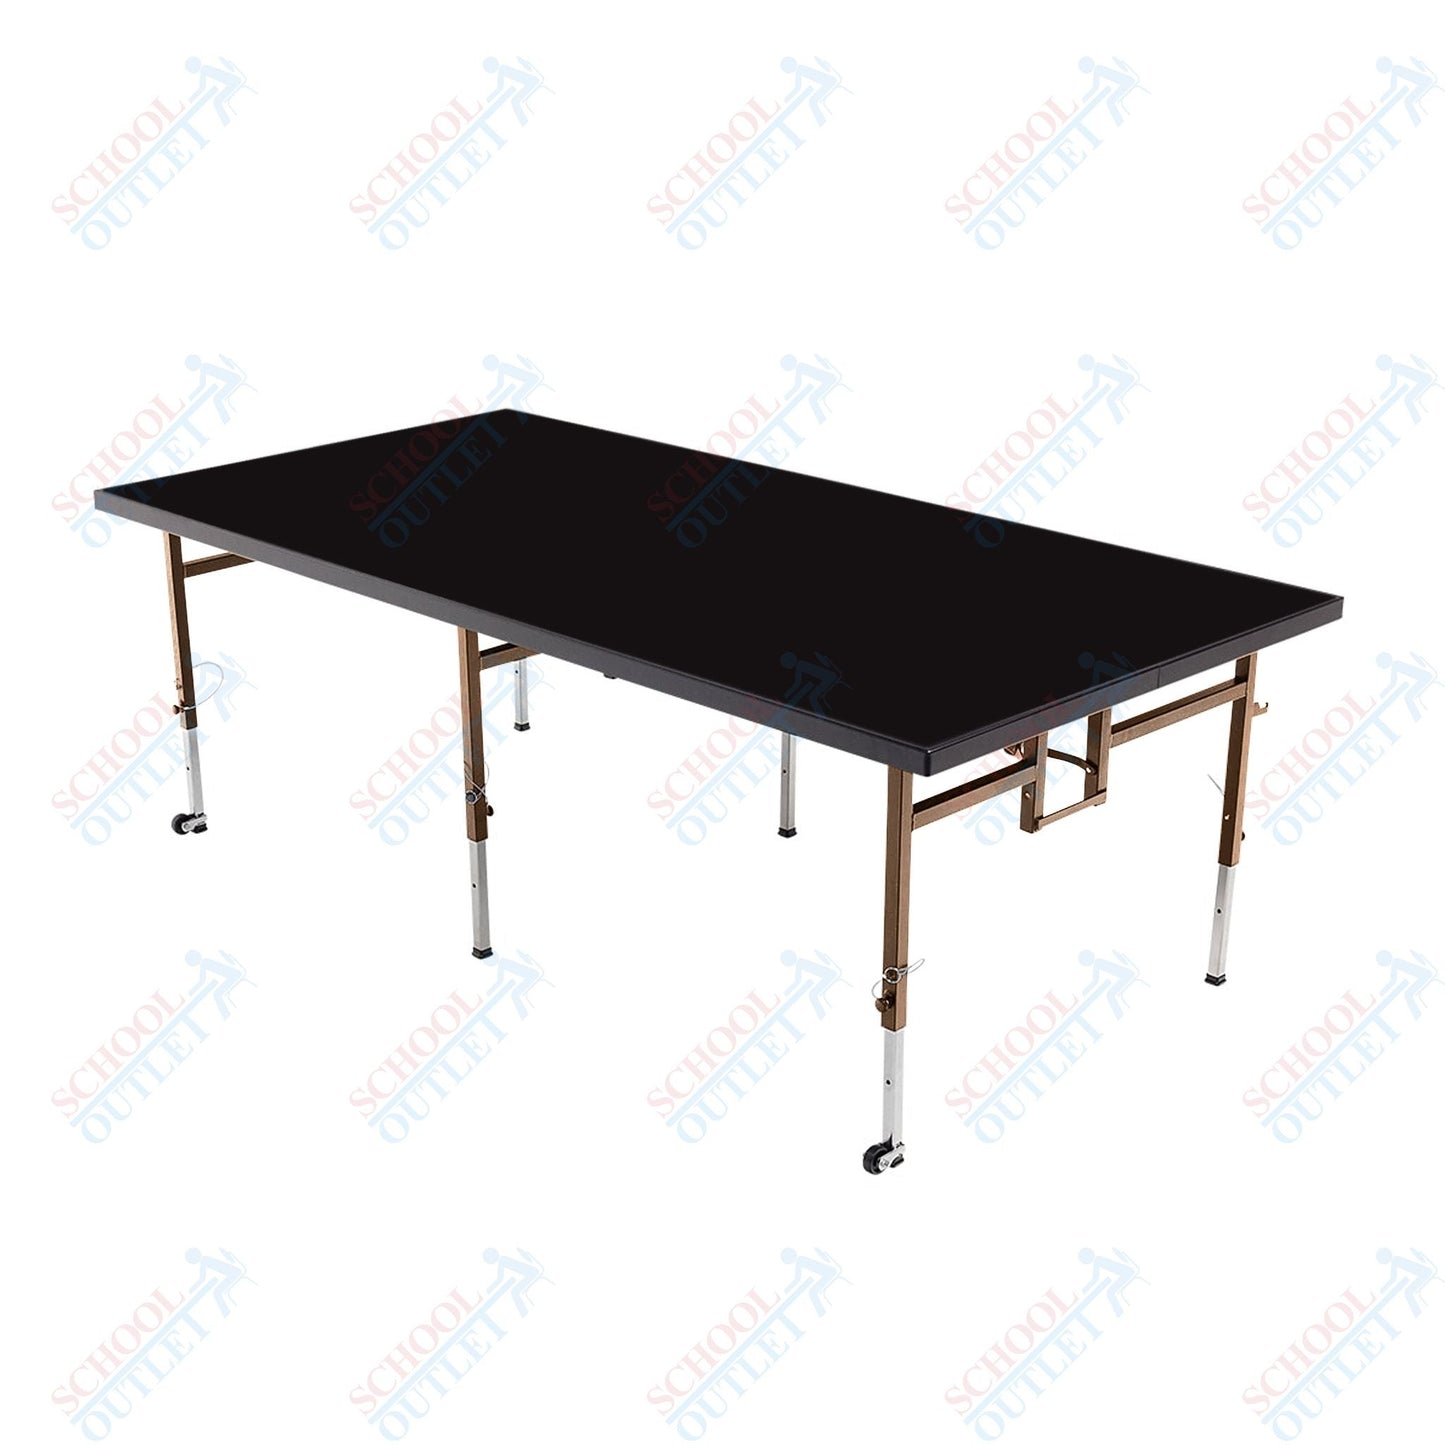 AmTab Adjustable Height Stage - Polypropylene Top - 36"W x 72"L x Adjustable 16" to 24"H (AmTab AMT-STA3616P) - SchoolOutlet